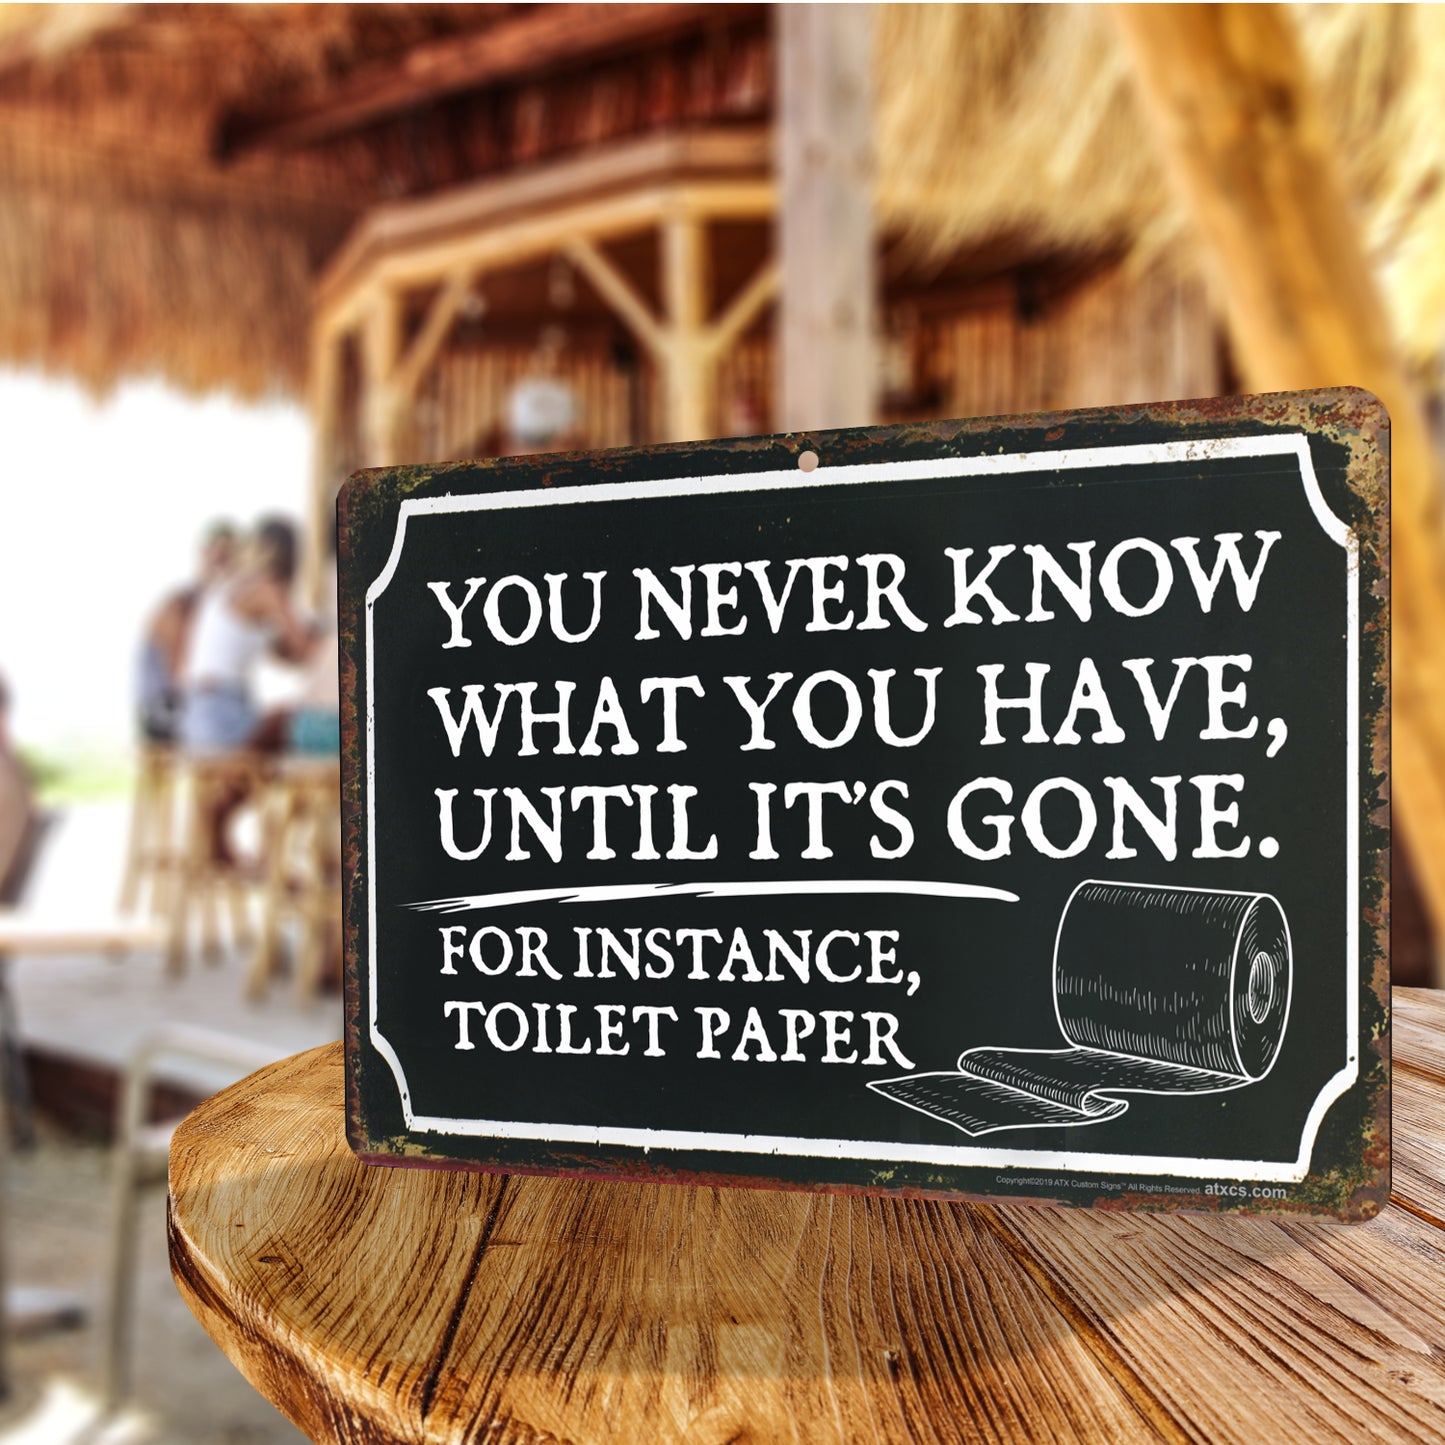 Bathroom Decor Sign You Never Know What You Have, Until It's Gone. For Instance, Toilet Paper Sign - Size 8 x 12